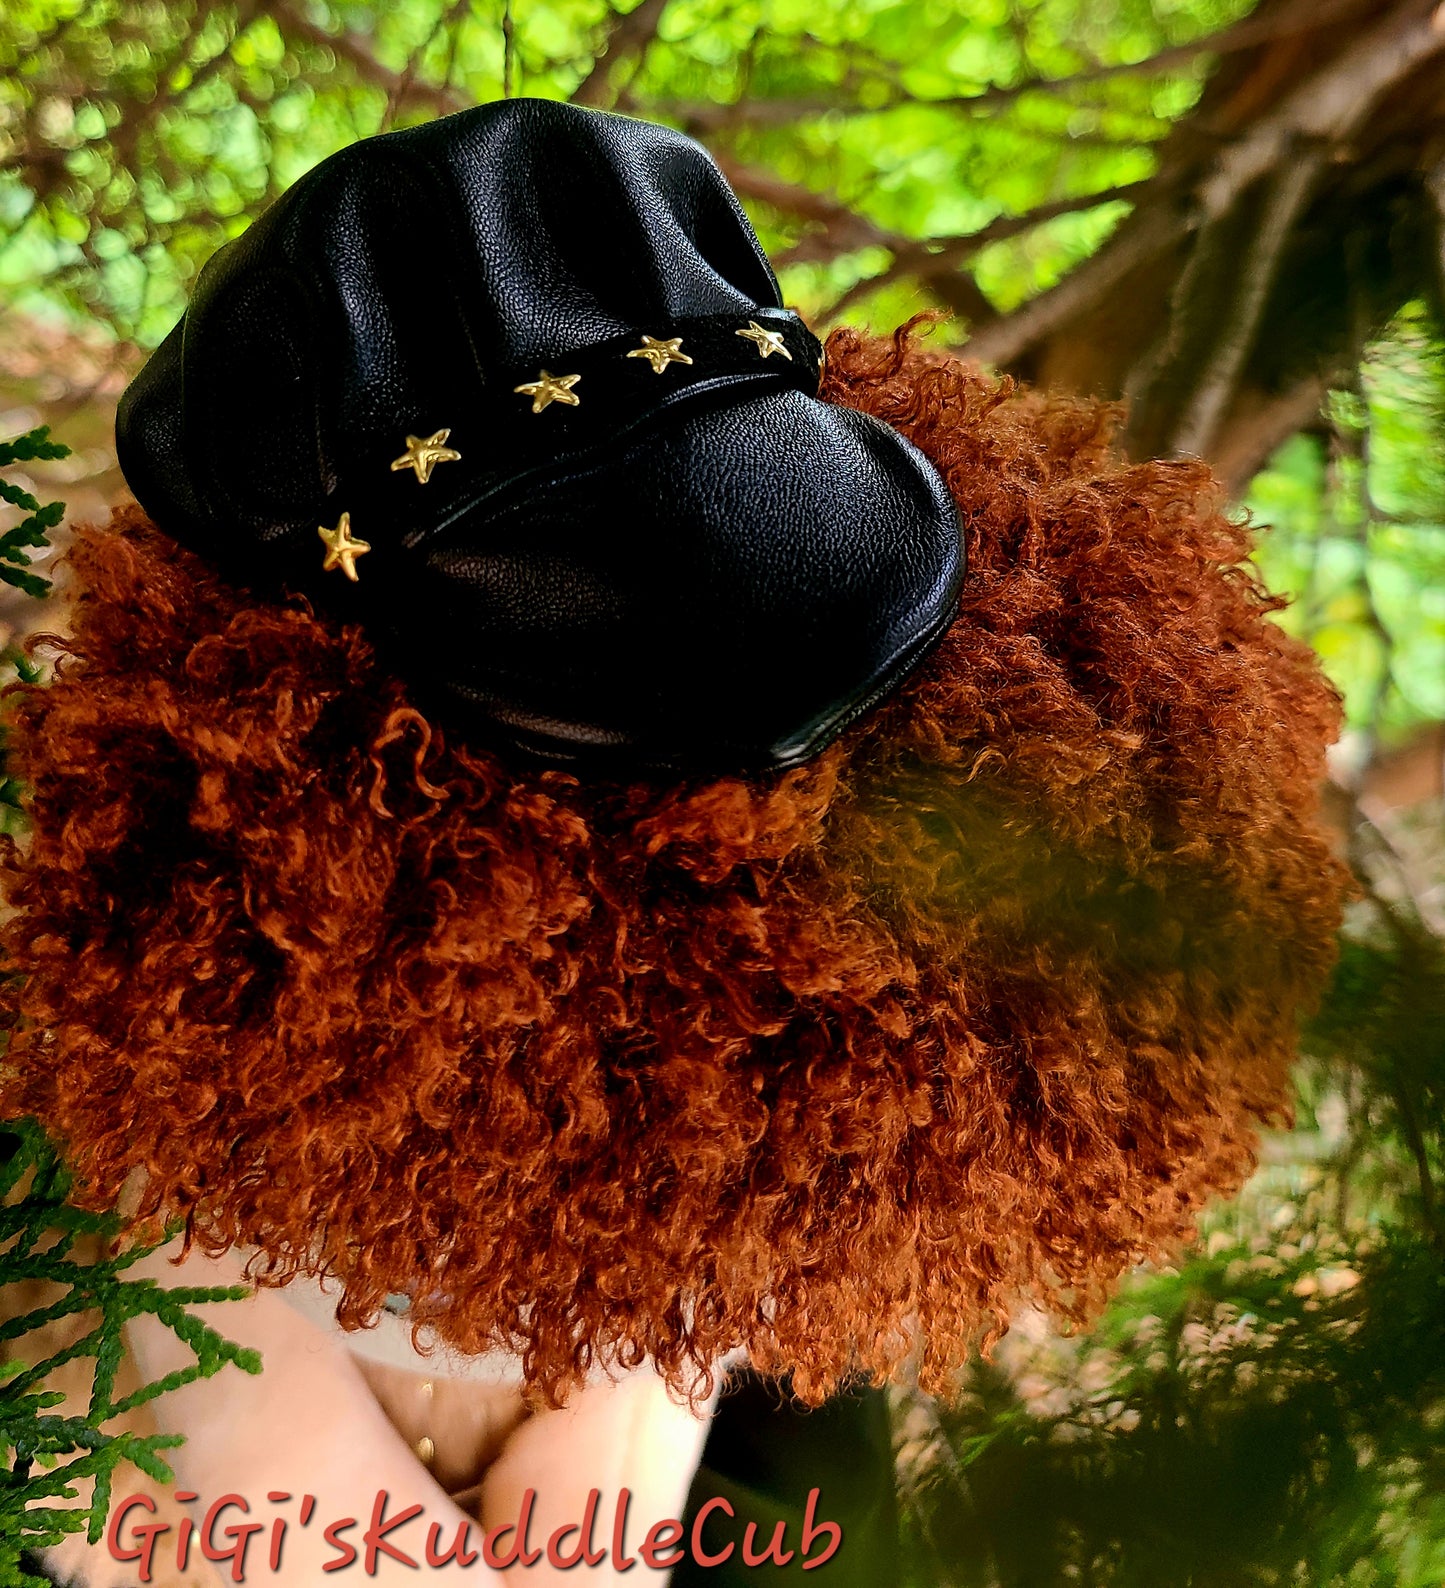 Soft Plush 15in Curly Red Hair With Cute Hat Rag Doll Plush Toy/ Decor/Handmade Baby Gift Toy